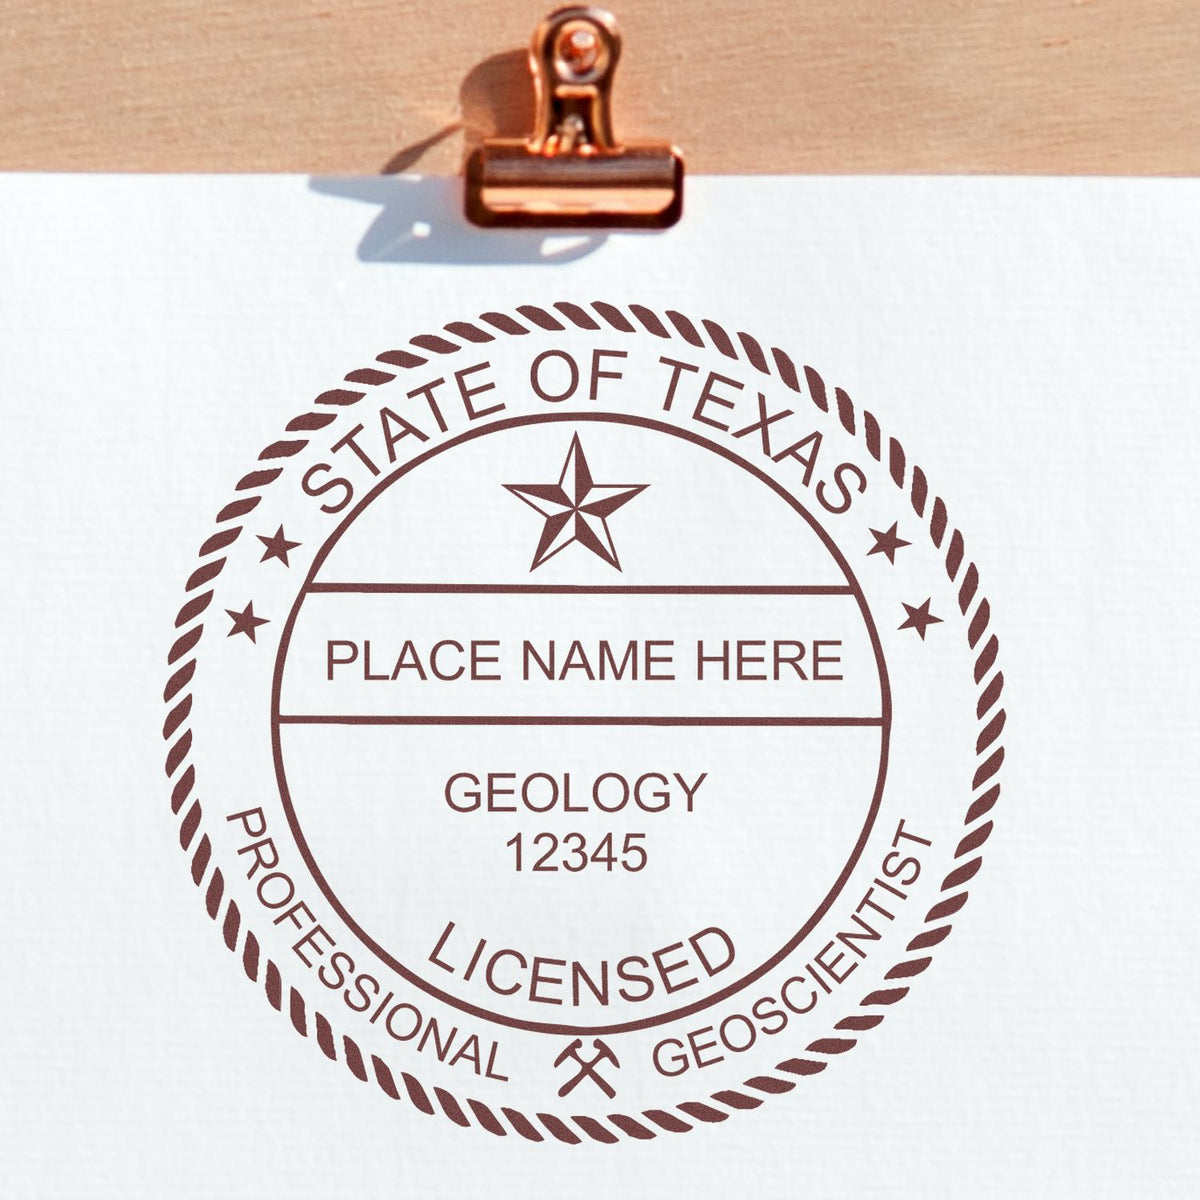 The Self-Inking Texas Geologist Stamp stamp impression comes to life with a crisp, detailed image stamped on paper - showcasing true professional quality.